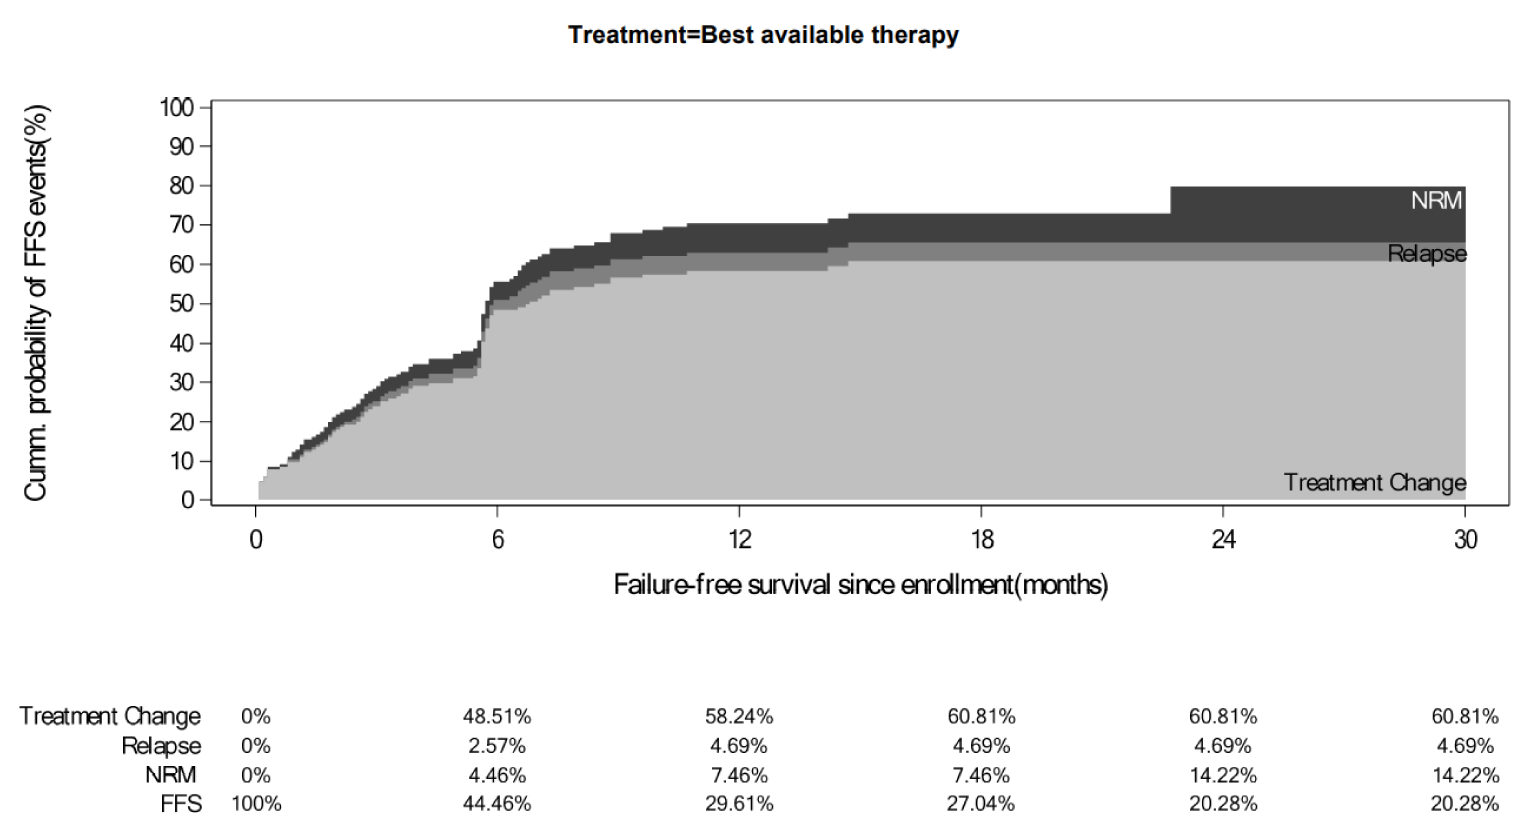 The cumulative probability of FFS events (%) is shown on the Y-axis and failure-free survival since enrolment (in months) is shown on the X-axis. For the BAT study group, the leading event related to FFS was change in systemic treatment. The probability of patients experiencing treatment changes after randomization and up to completion of cycle 7 day 1 was 48.51% in the BAT group. The probability of patients experiencing treatment changes after randomization and up to month 30 was 60% in the BAT group.